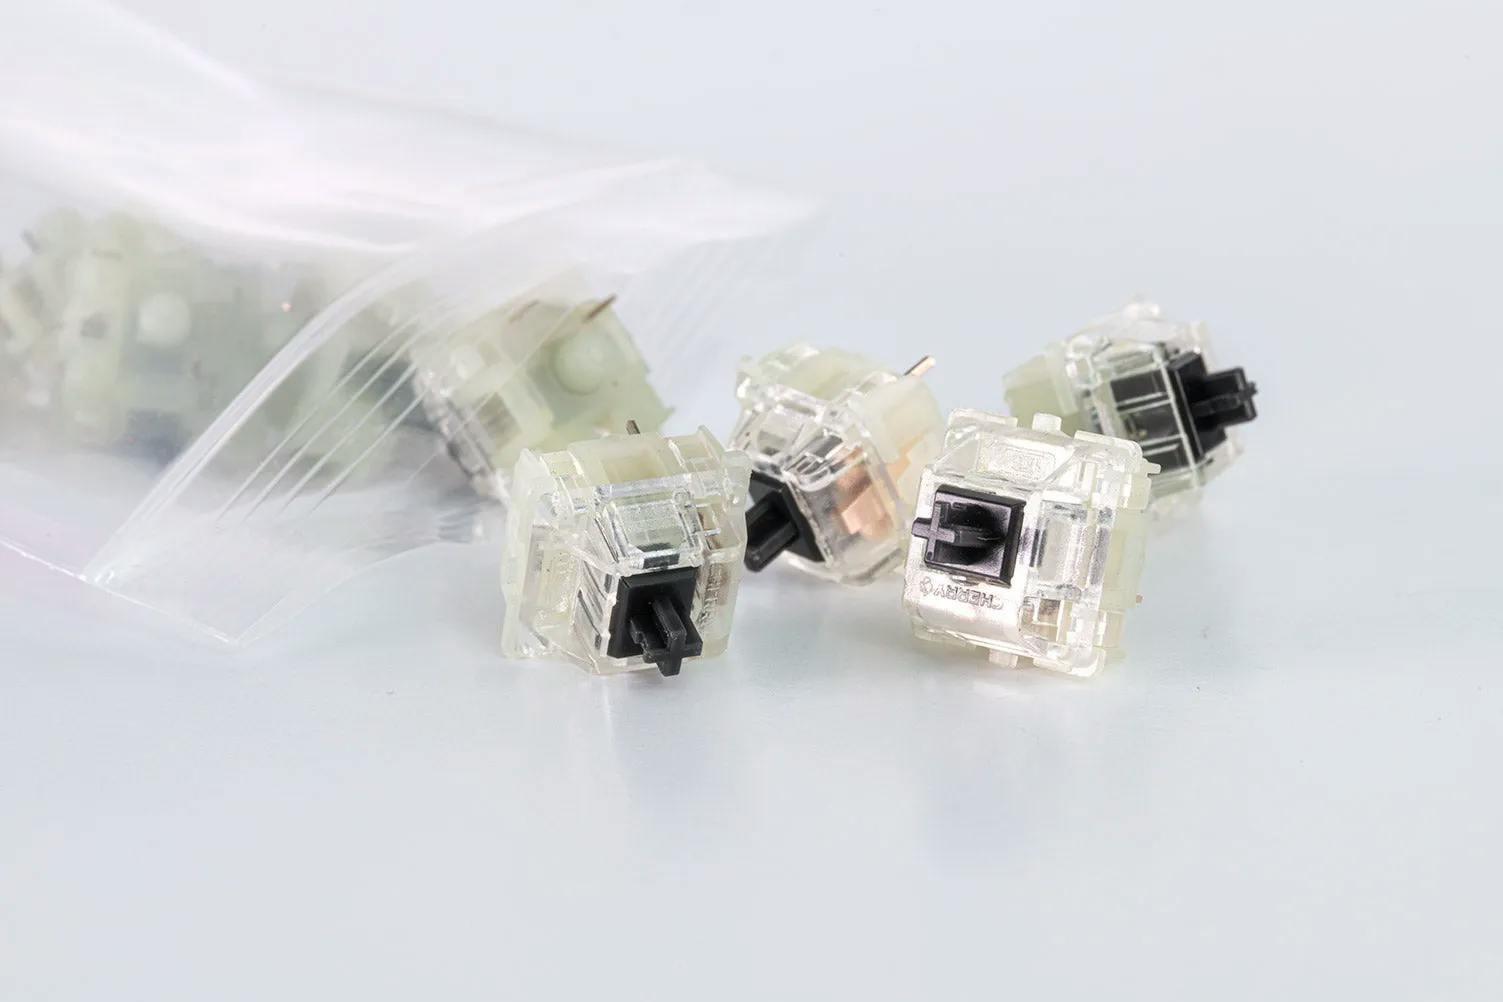 Image for Cherry MX Black Switches